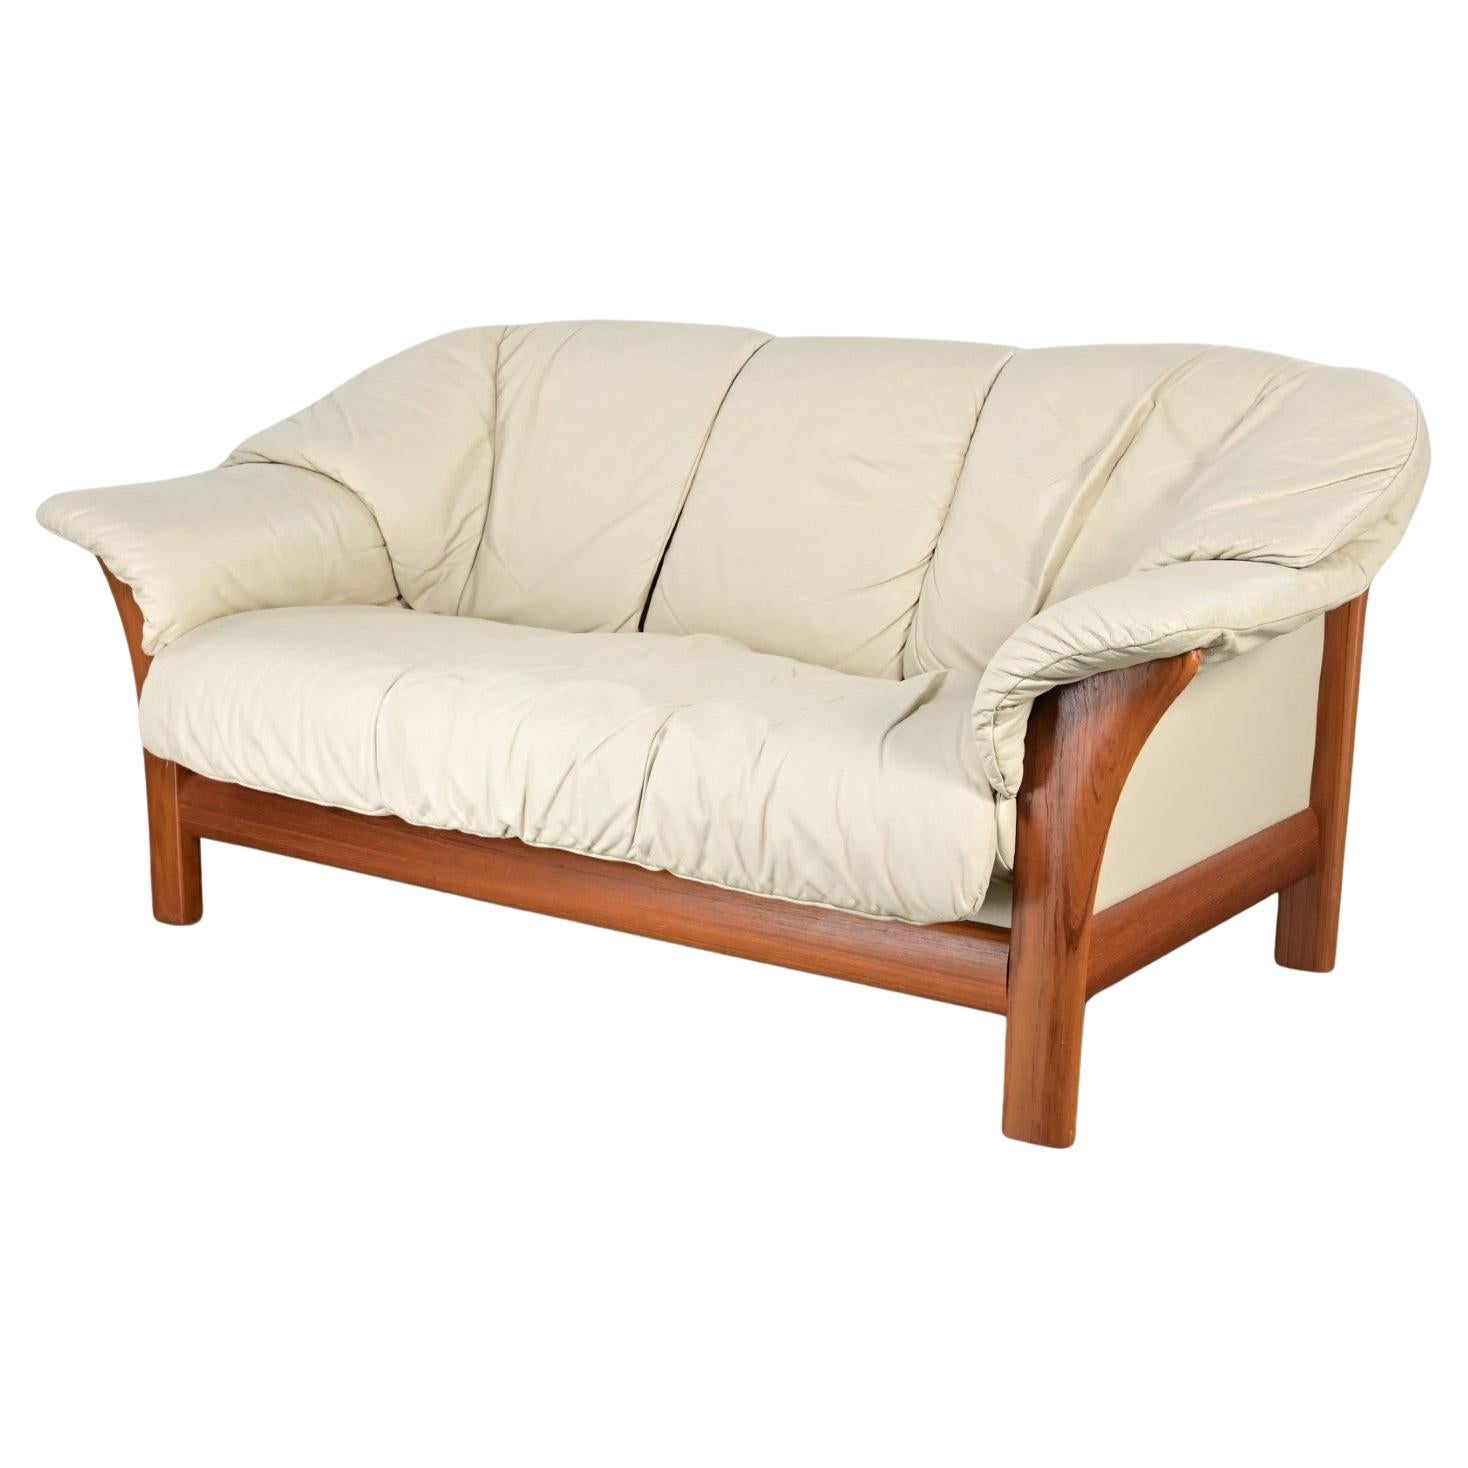 Scandinavian Modern Teak & Off White Leather Small Sofa Attributed to Ekornes For Sale